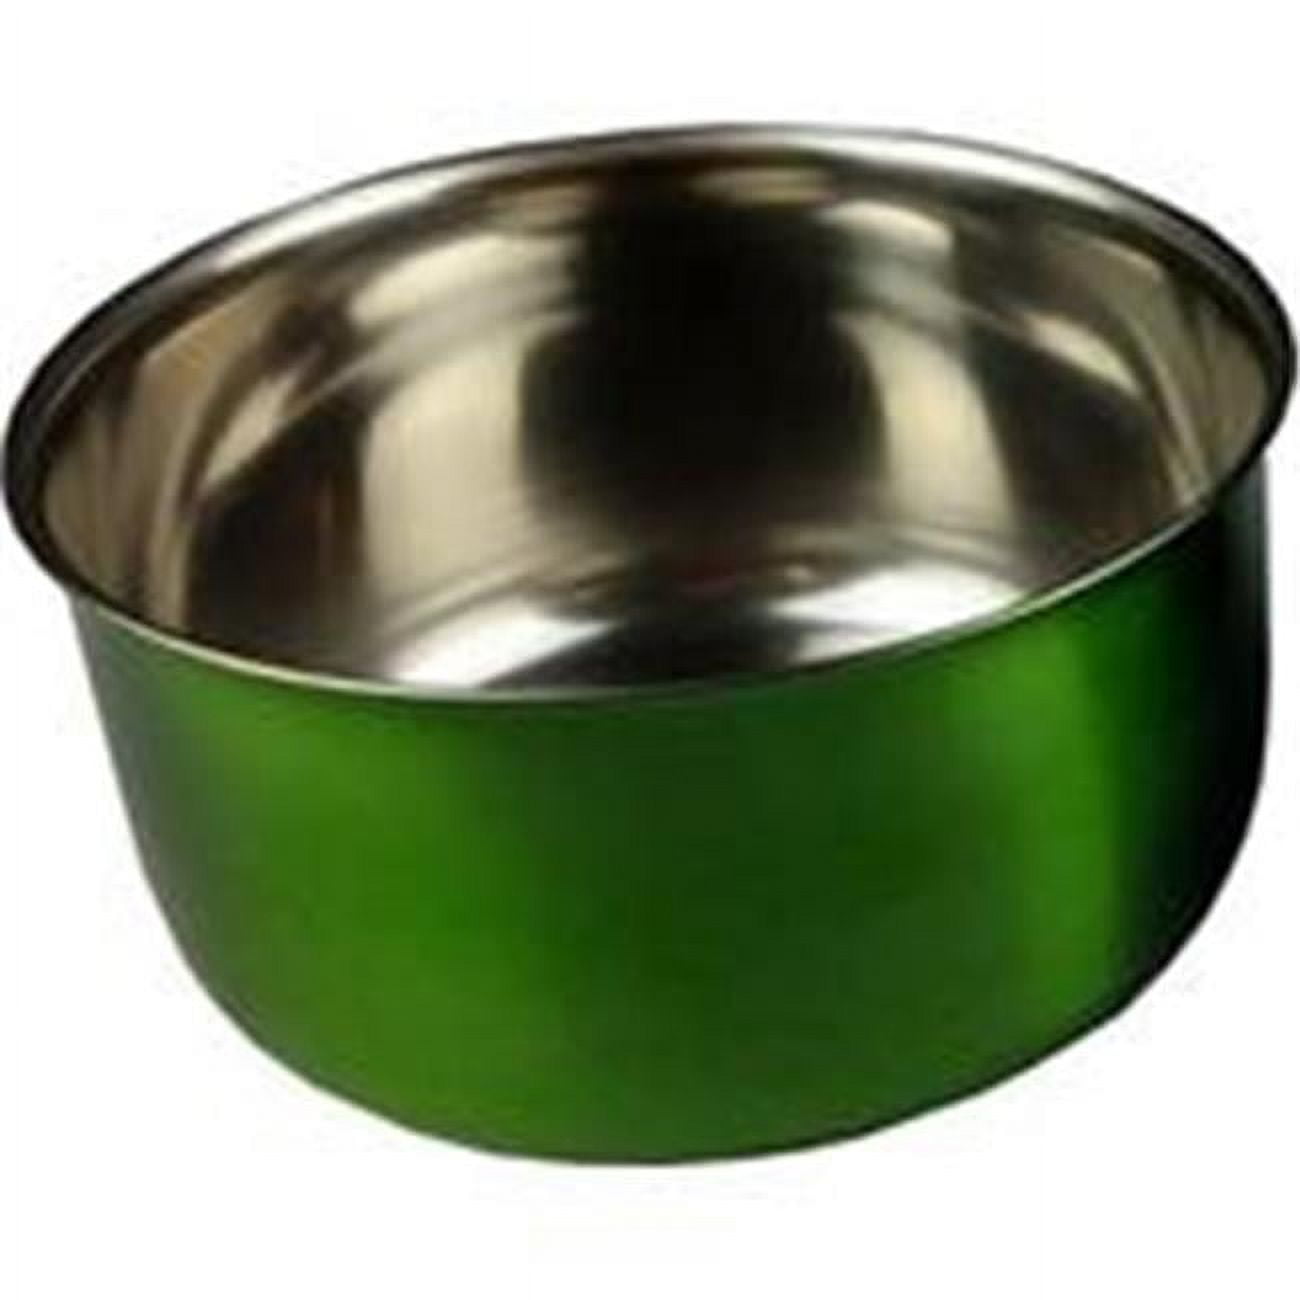 001531 10 Oz Stainless Steel Coop Cup With Bolt Hanger, Green